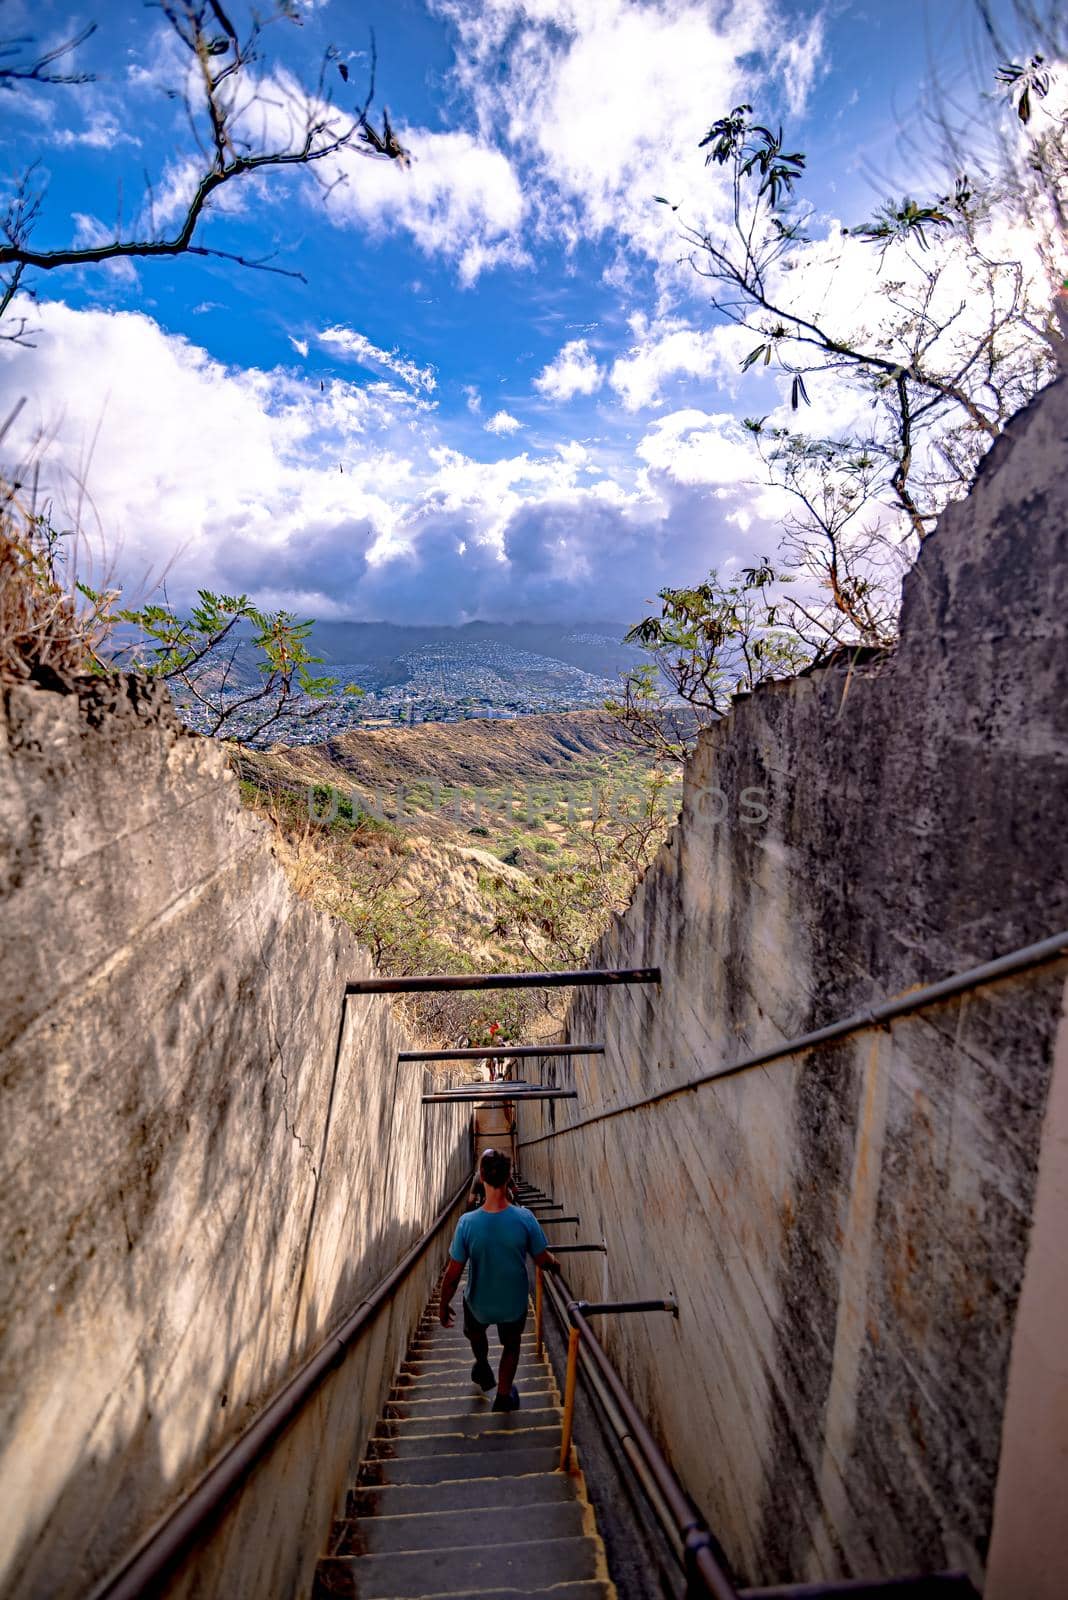 walking down a stair at diamond head state park in oahu hawaii by digidreamgrafix